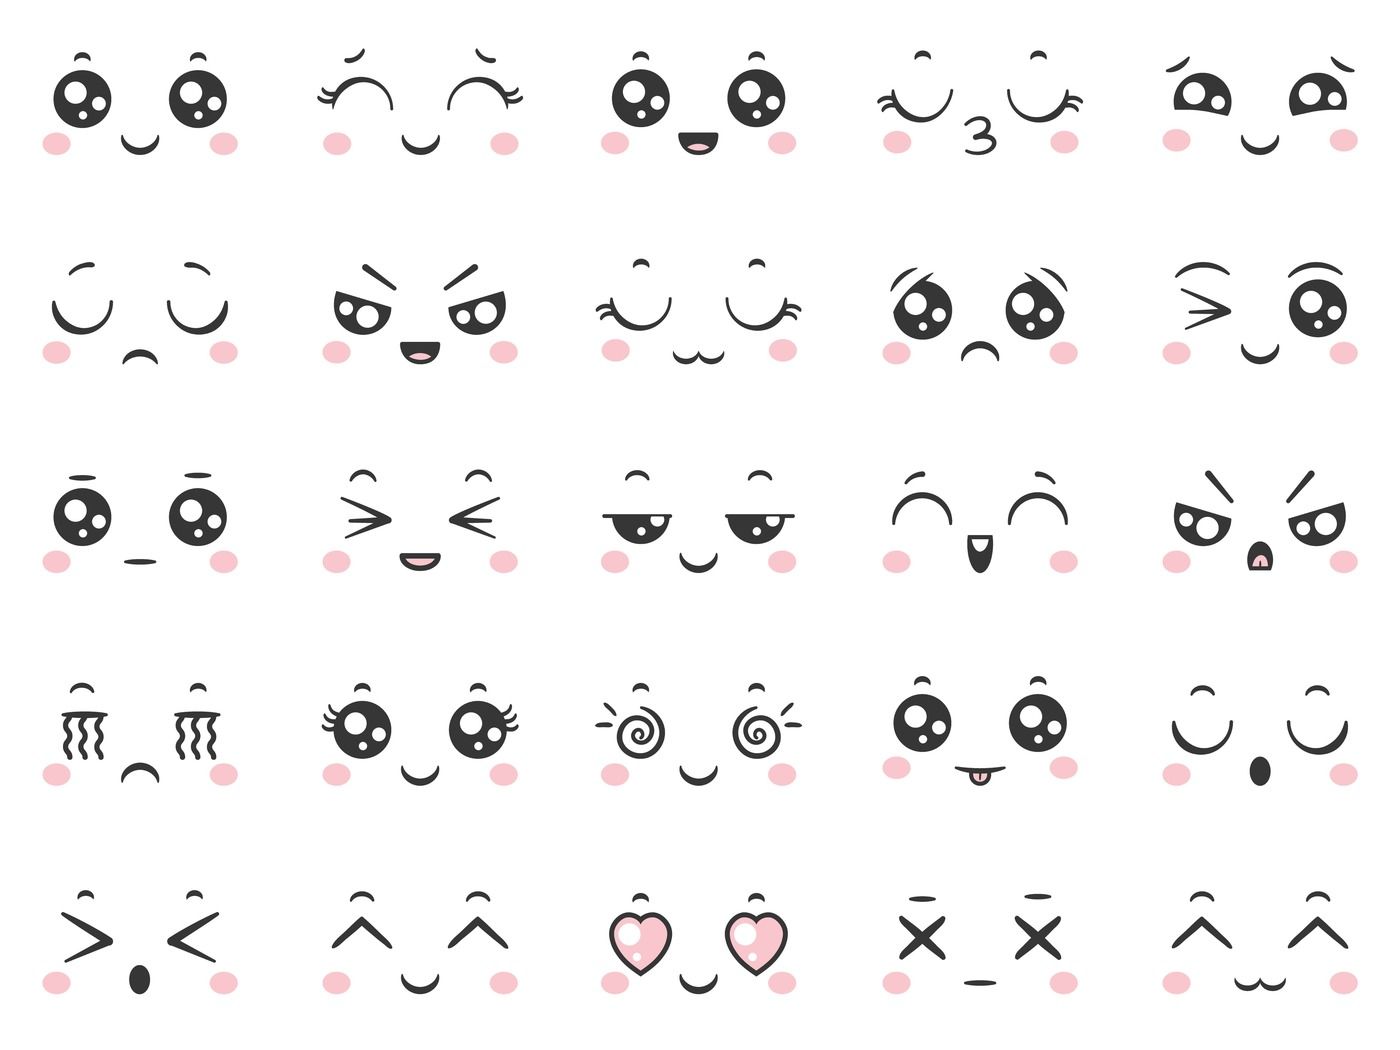 Cute doodle emoticons with facial expressions. Japanese anime style em